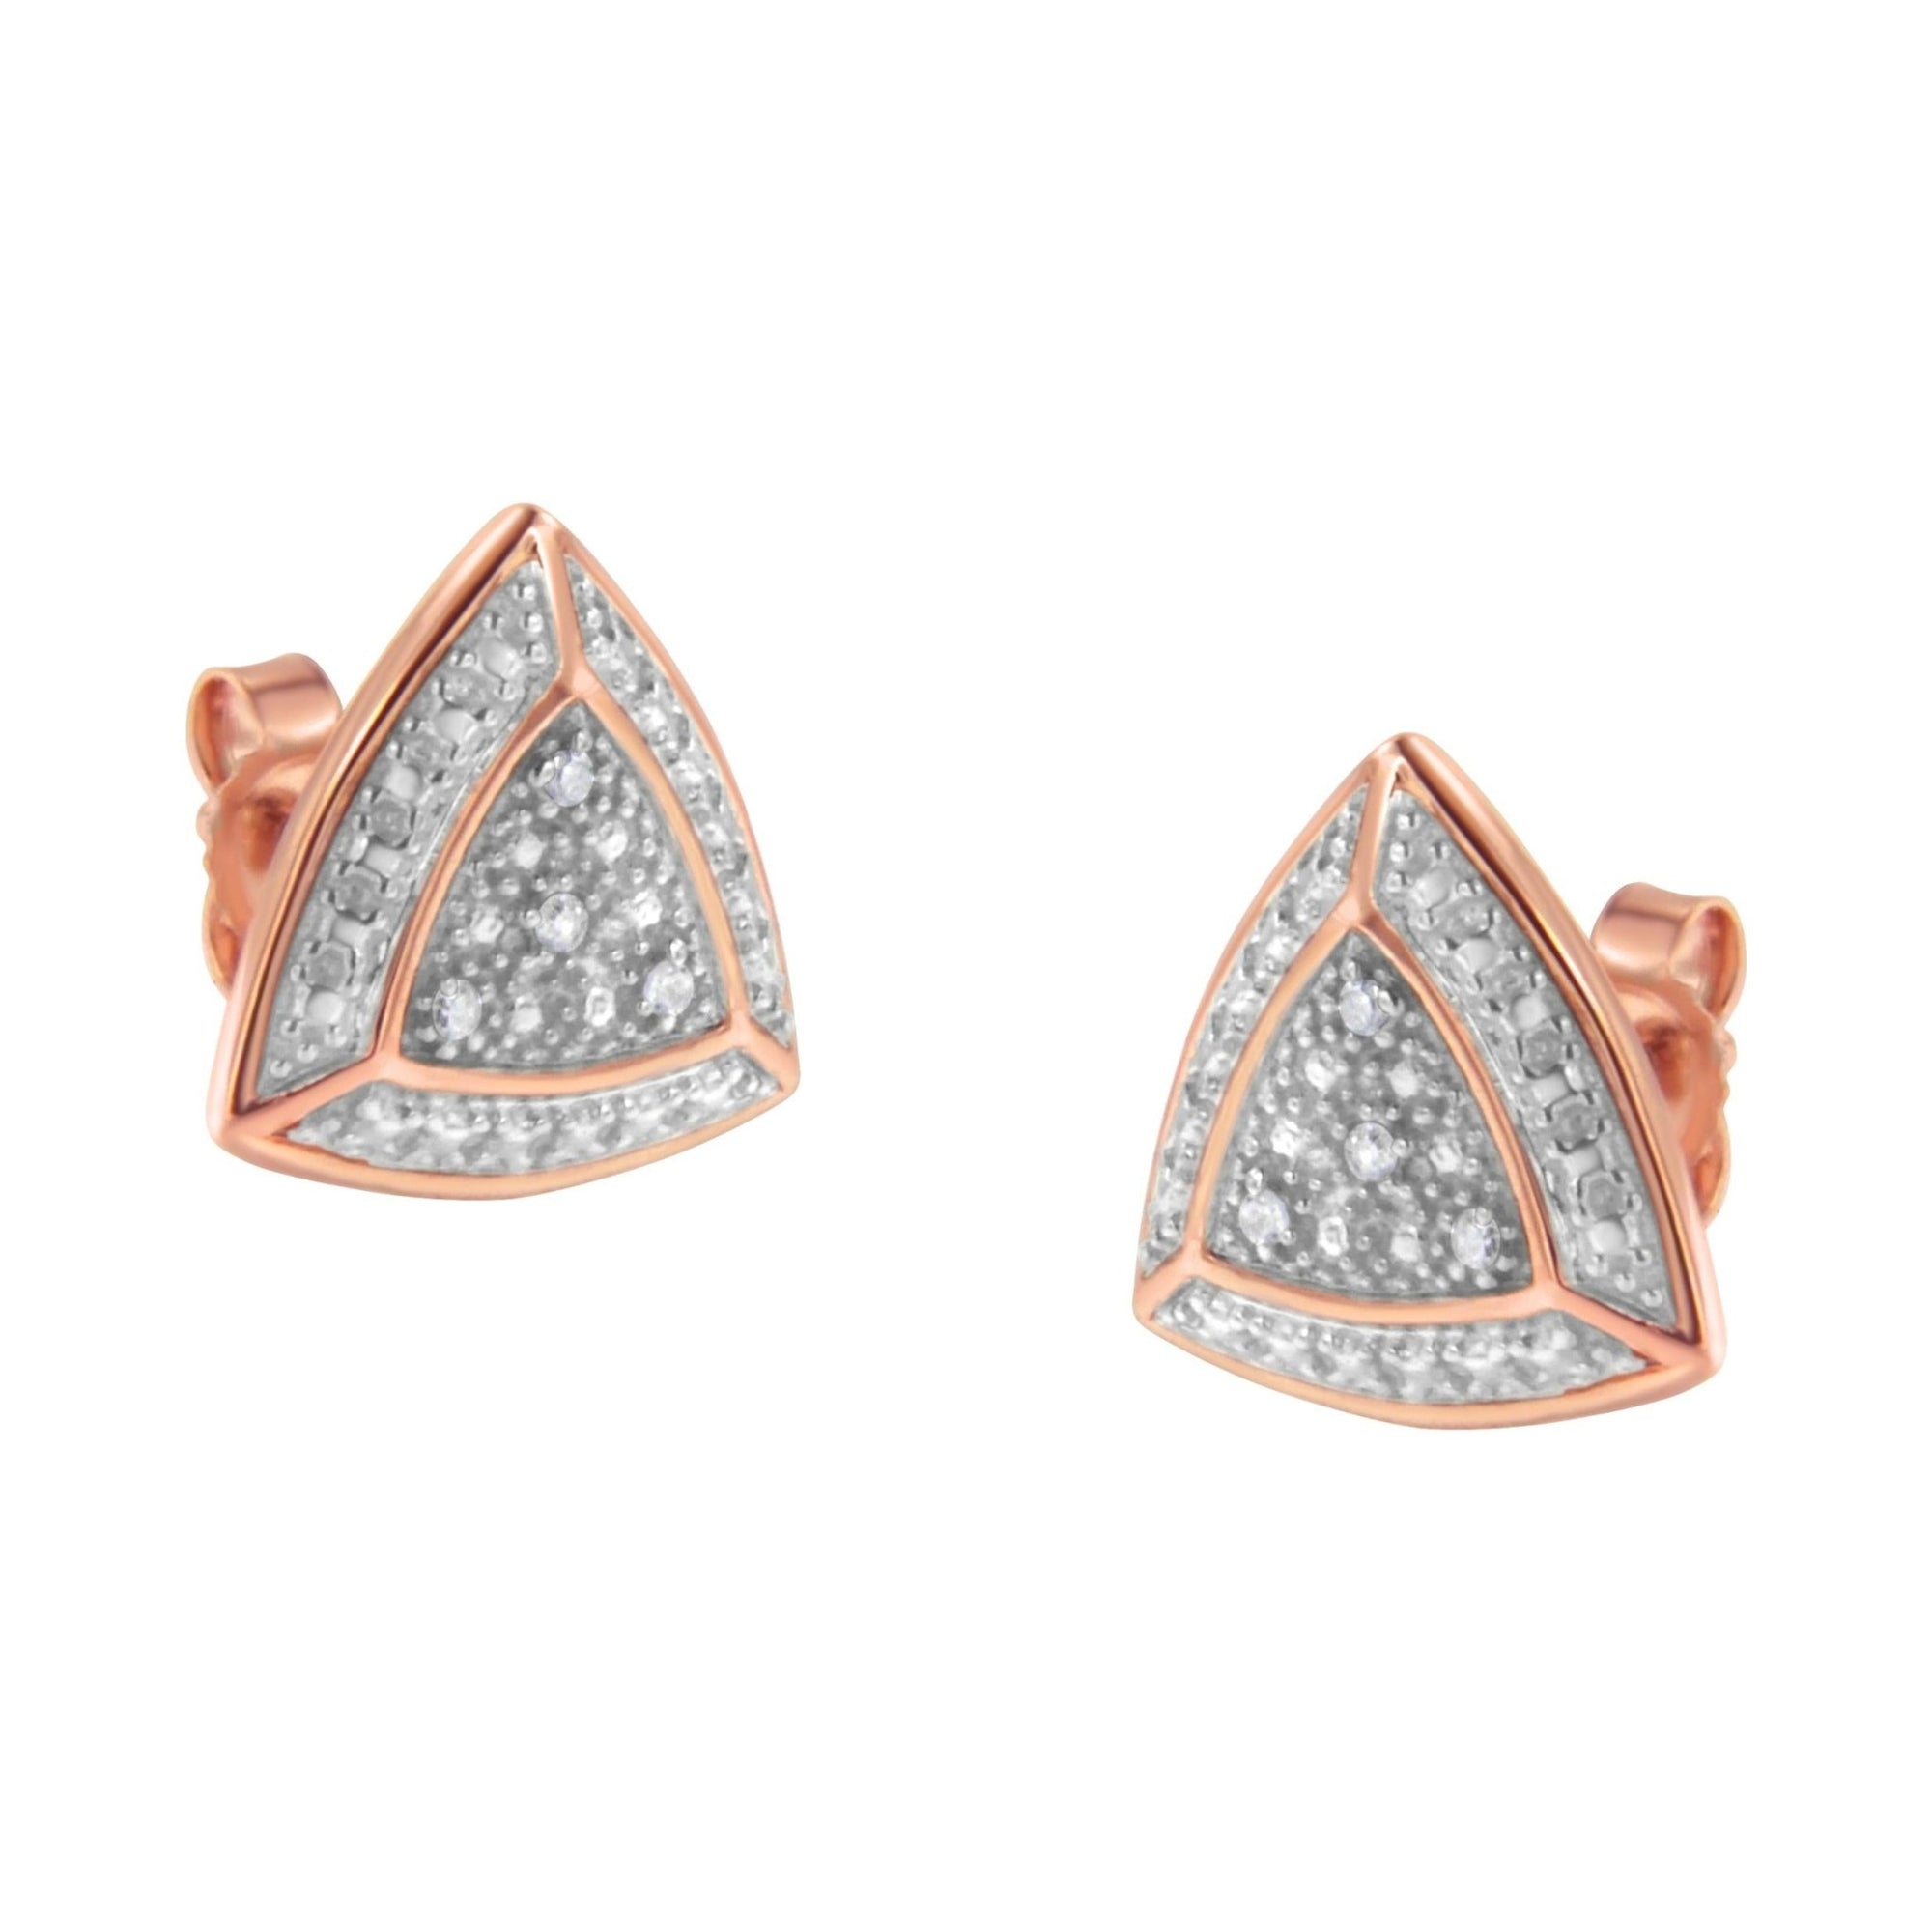 14K Rose Gold over .925 Sterling Silver Diamond-Accented Trillion Shaped 4-Stone Halo-Style Stud Earrings (H-I Color, I2-I3 Clarity) - LinkagejewelrydesignLinkagejewelrydesign